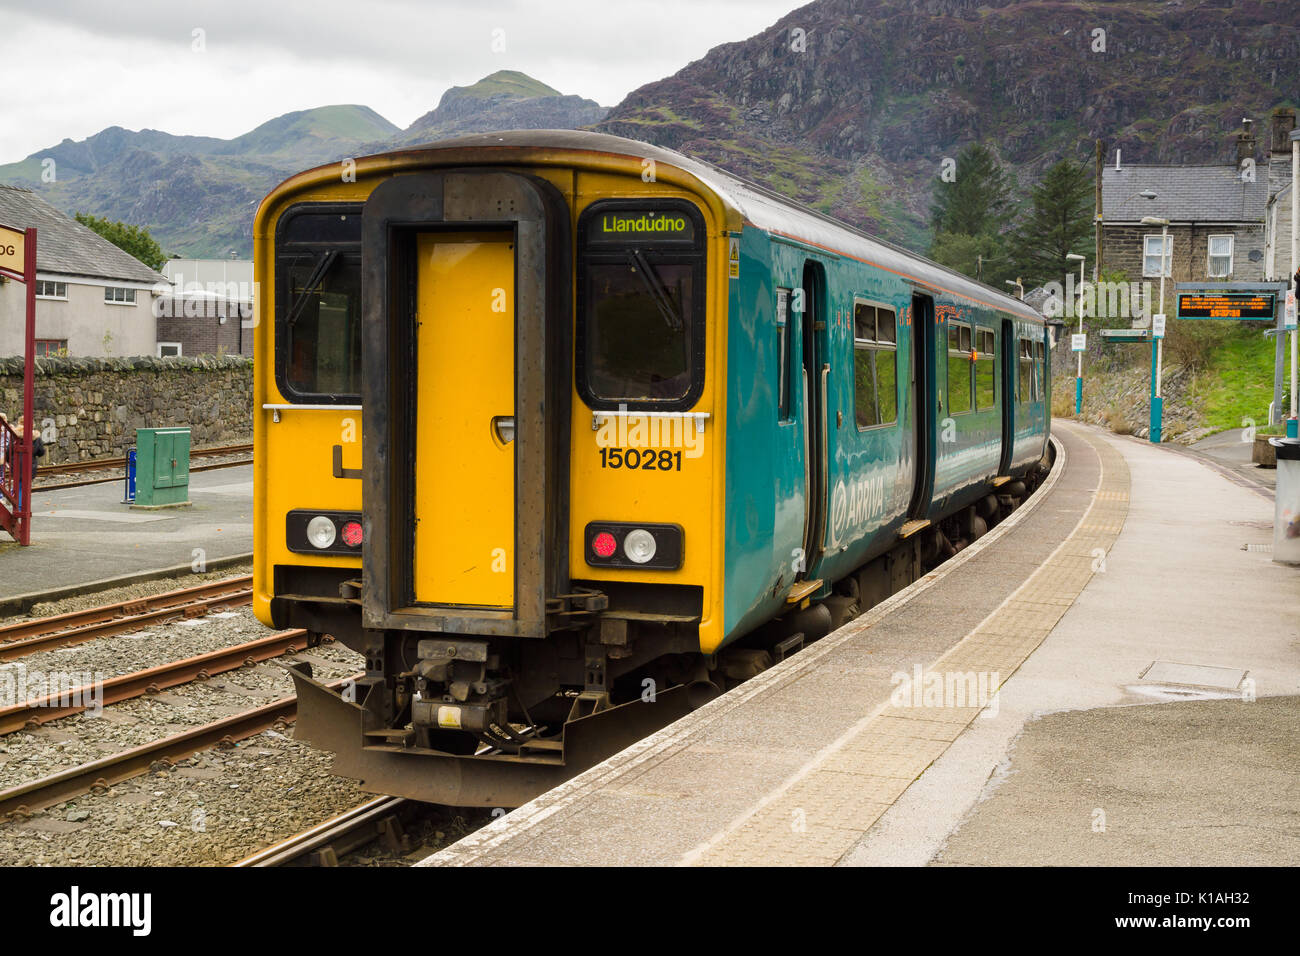 Arriva Trains Wales passenger train Sprinter Class 150/2 diesel multiple unit or DMU typically used on rural lines Stock Photo